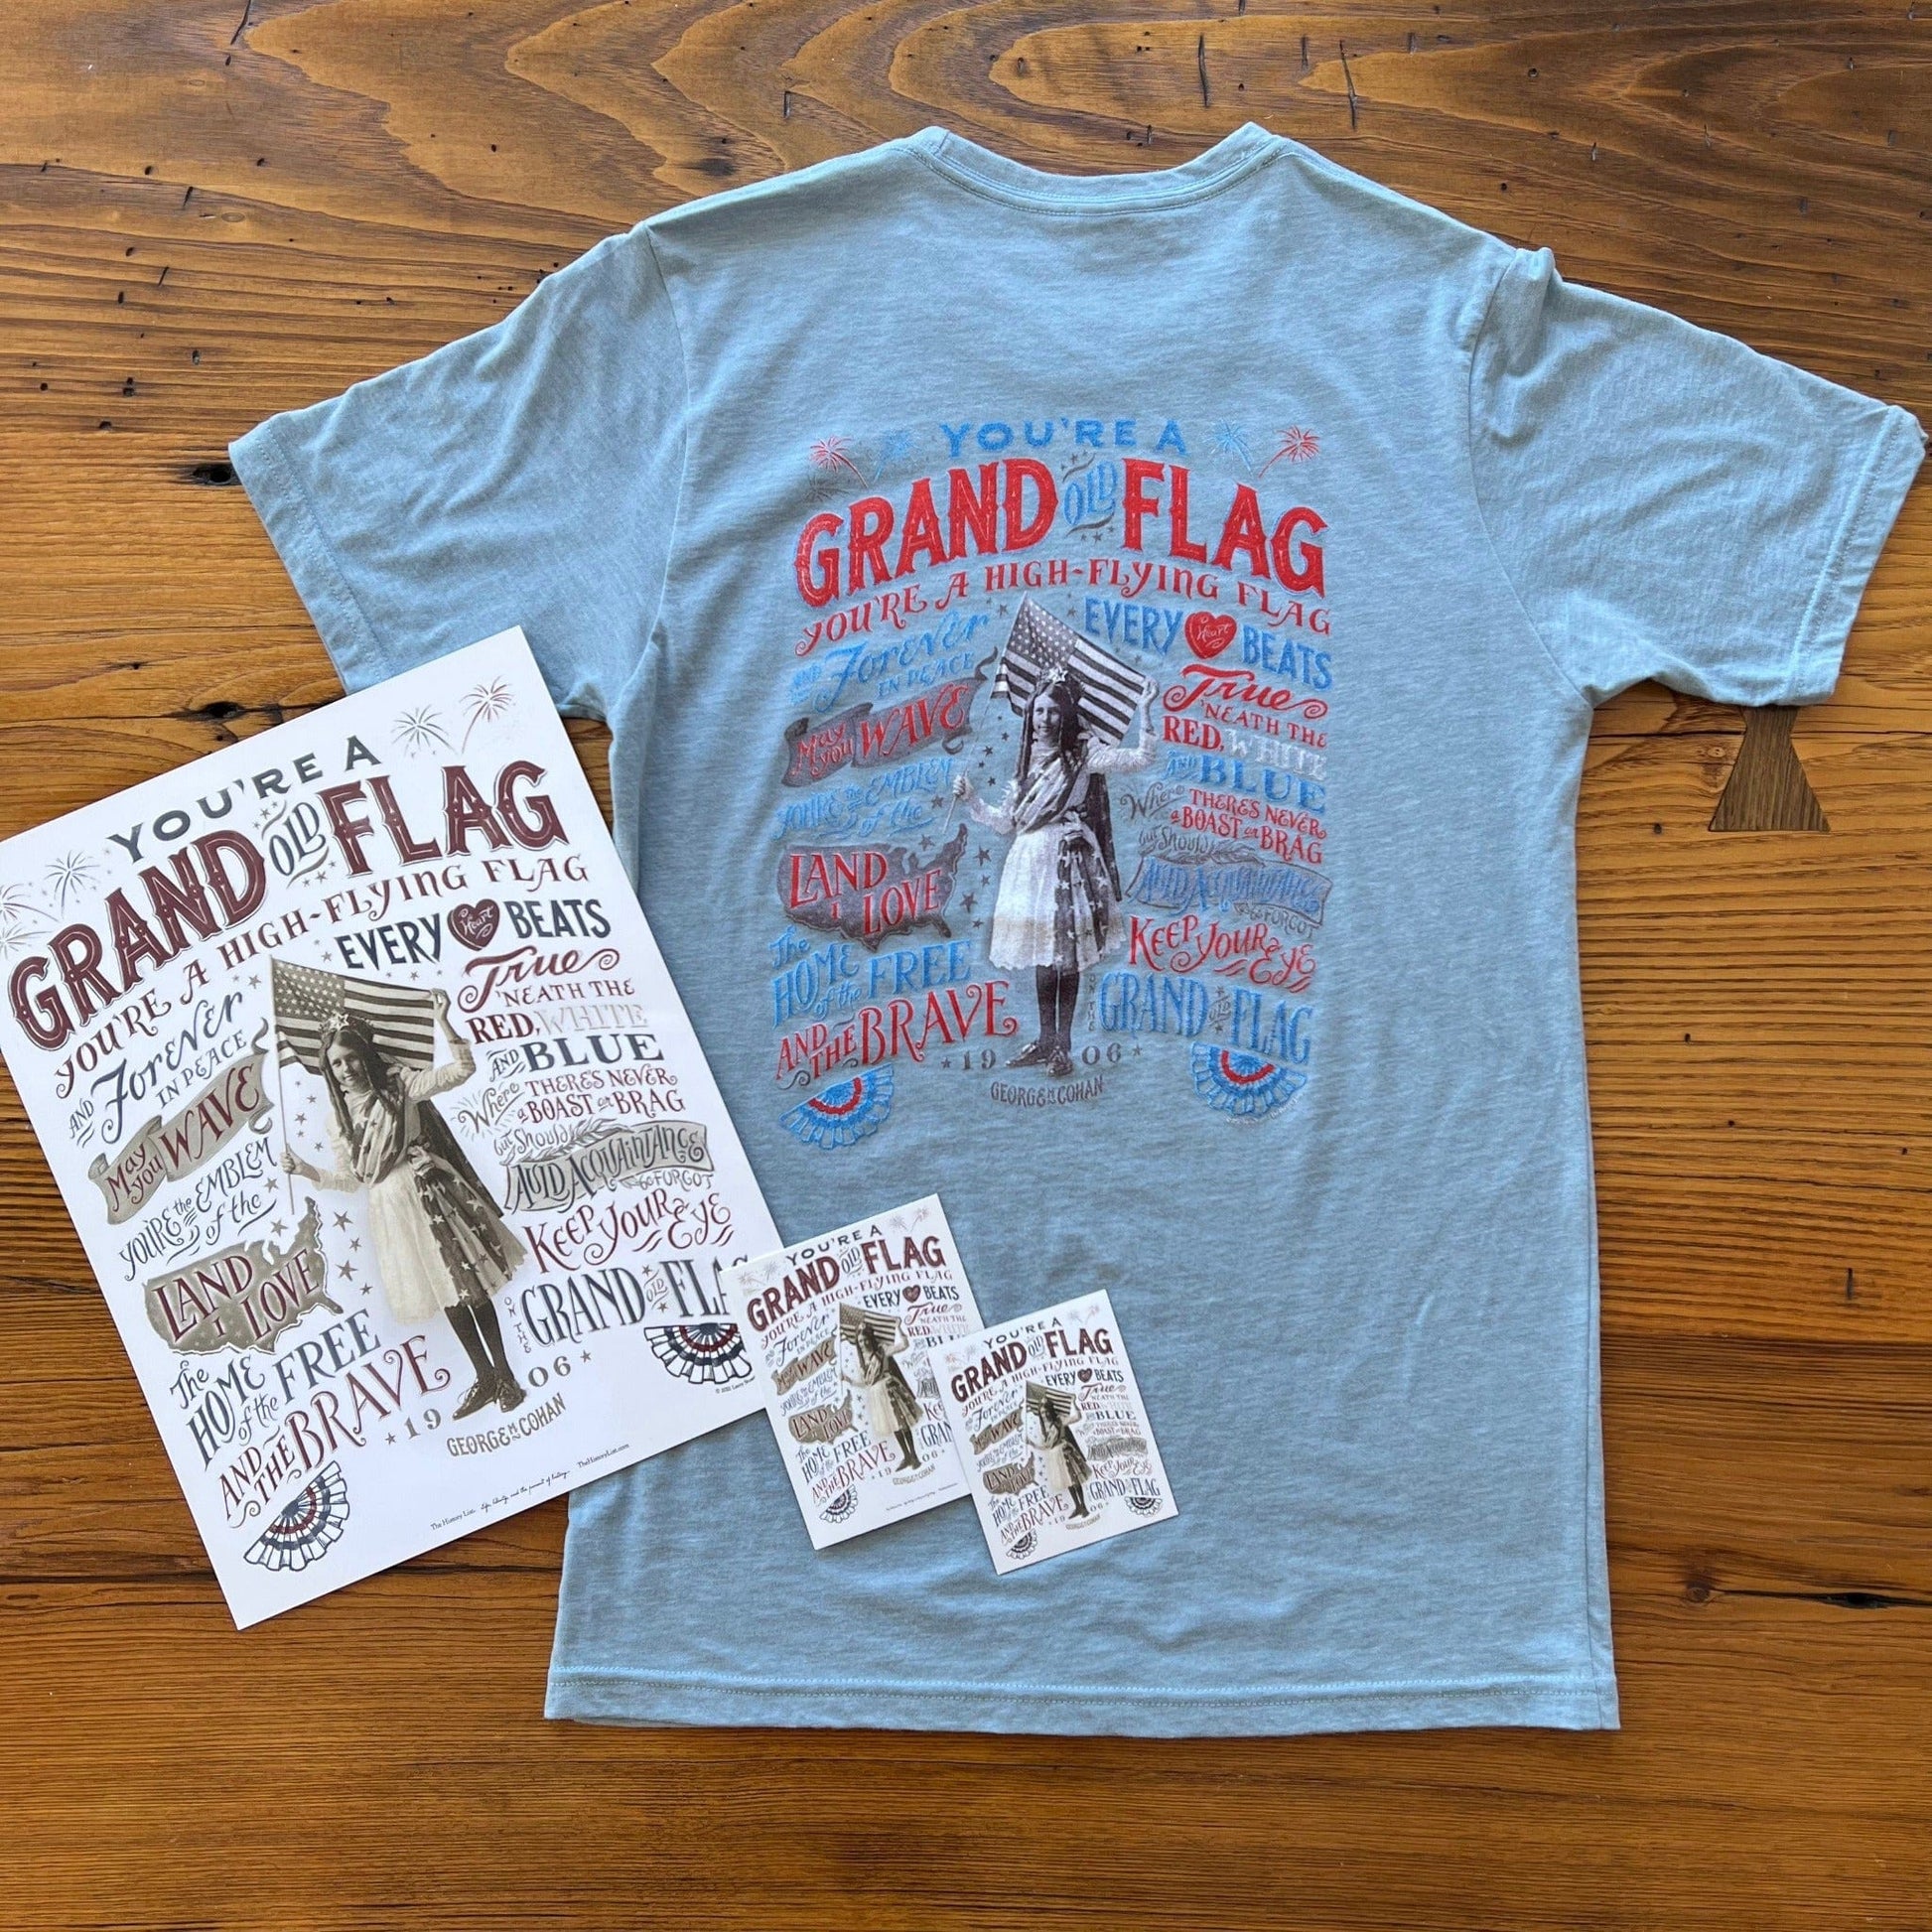 "Grand Old Flag" Magnet, shirt and poster from the history list store